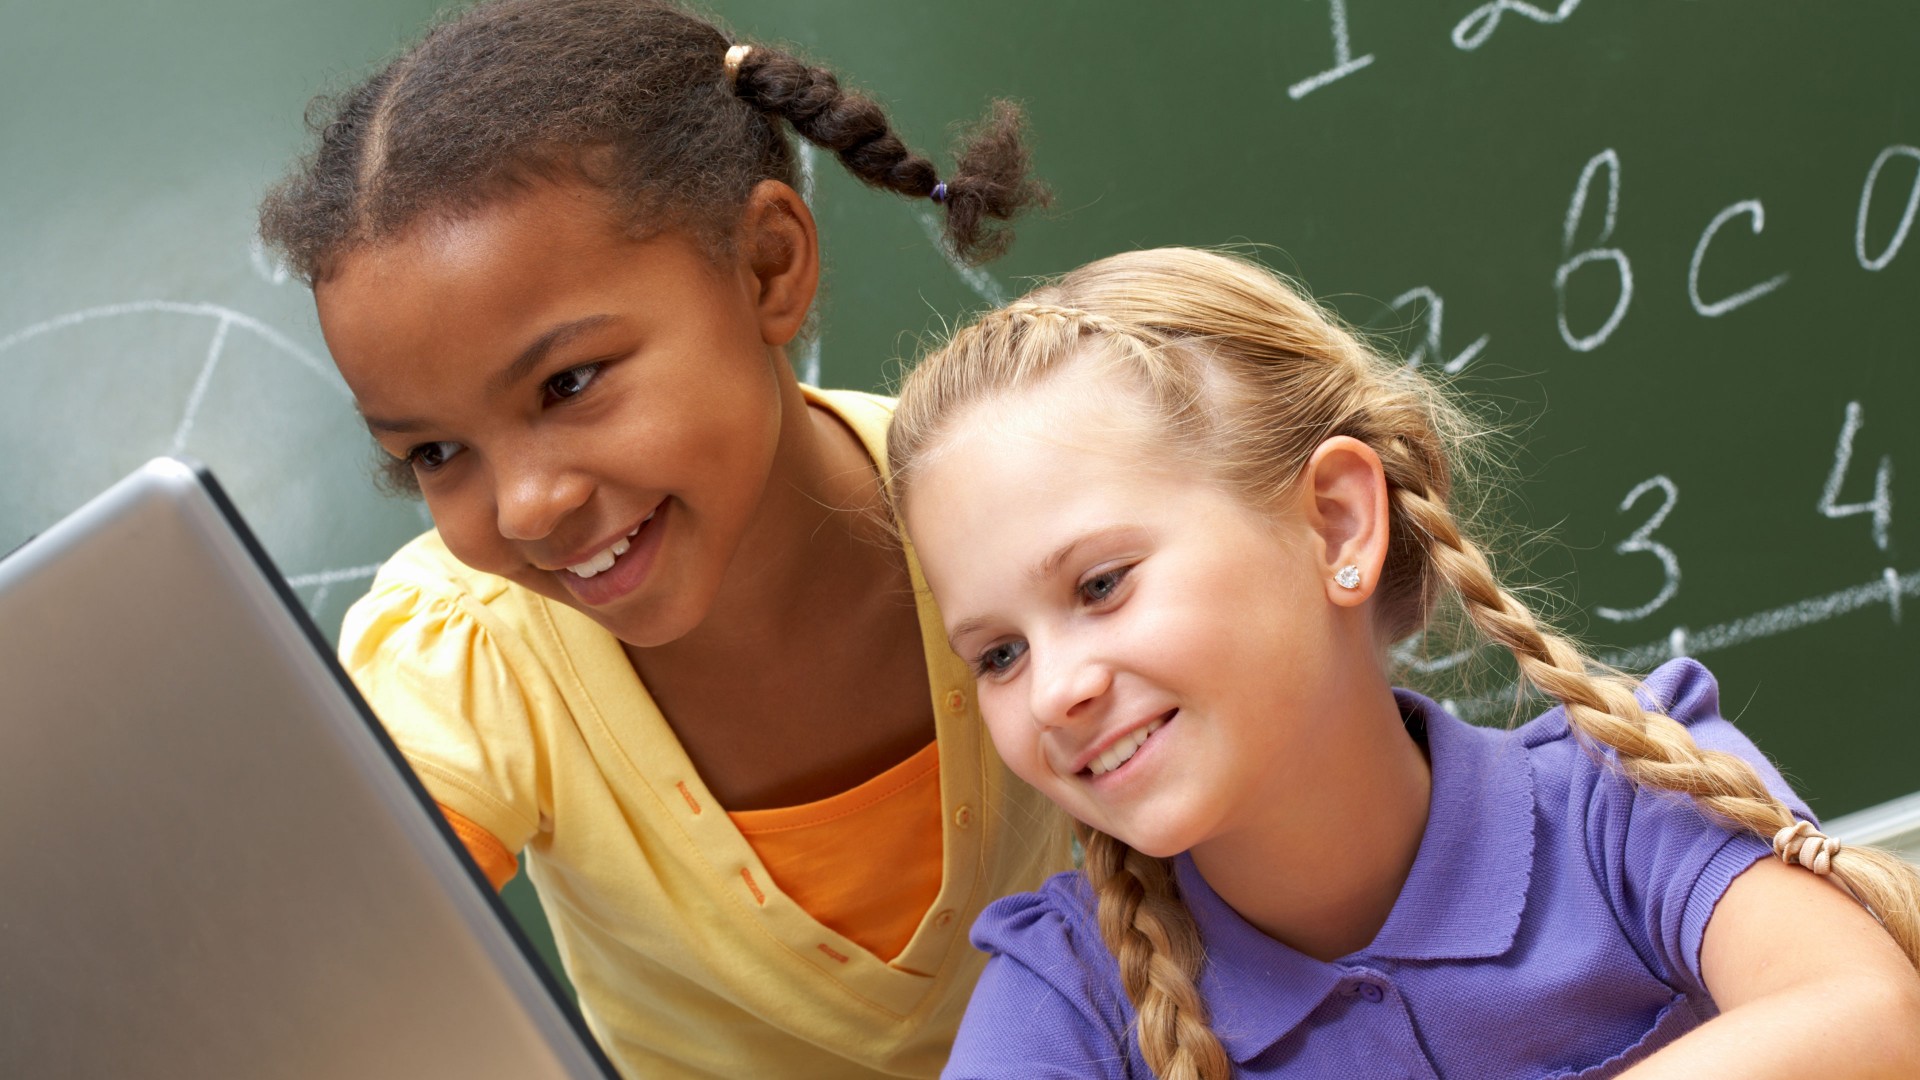 Two smiling school-age girls, one black, one white, loot at a laptop with a blackboard in the background